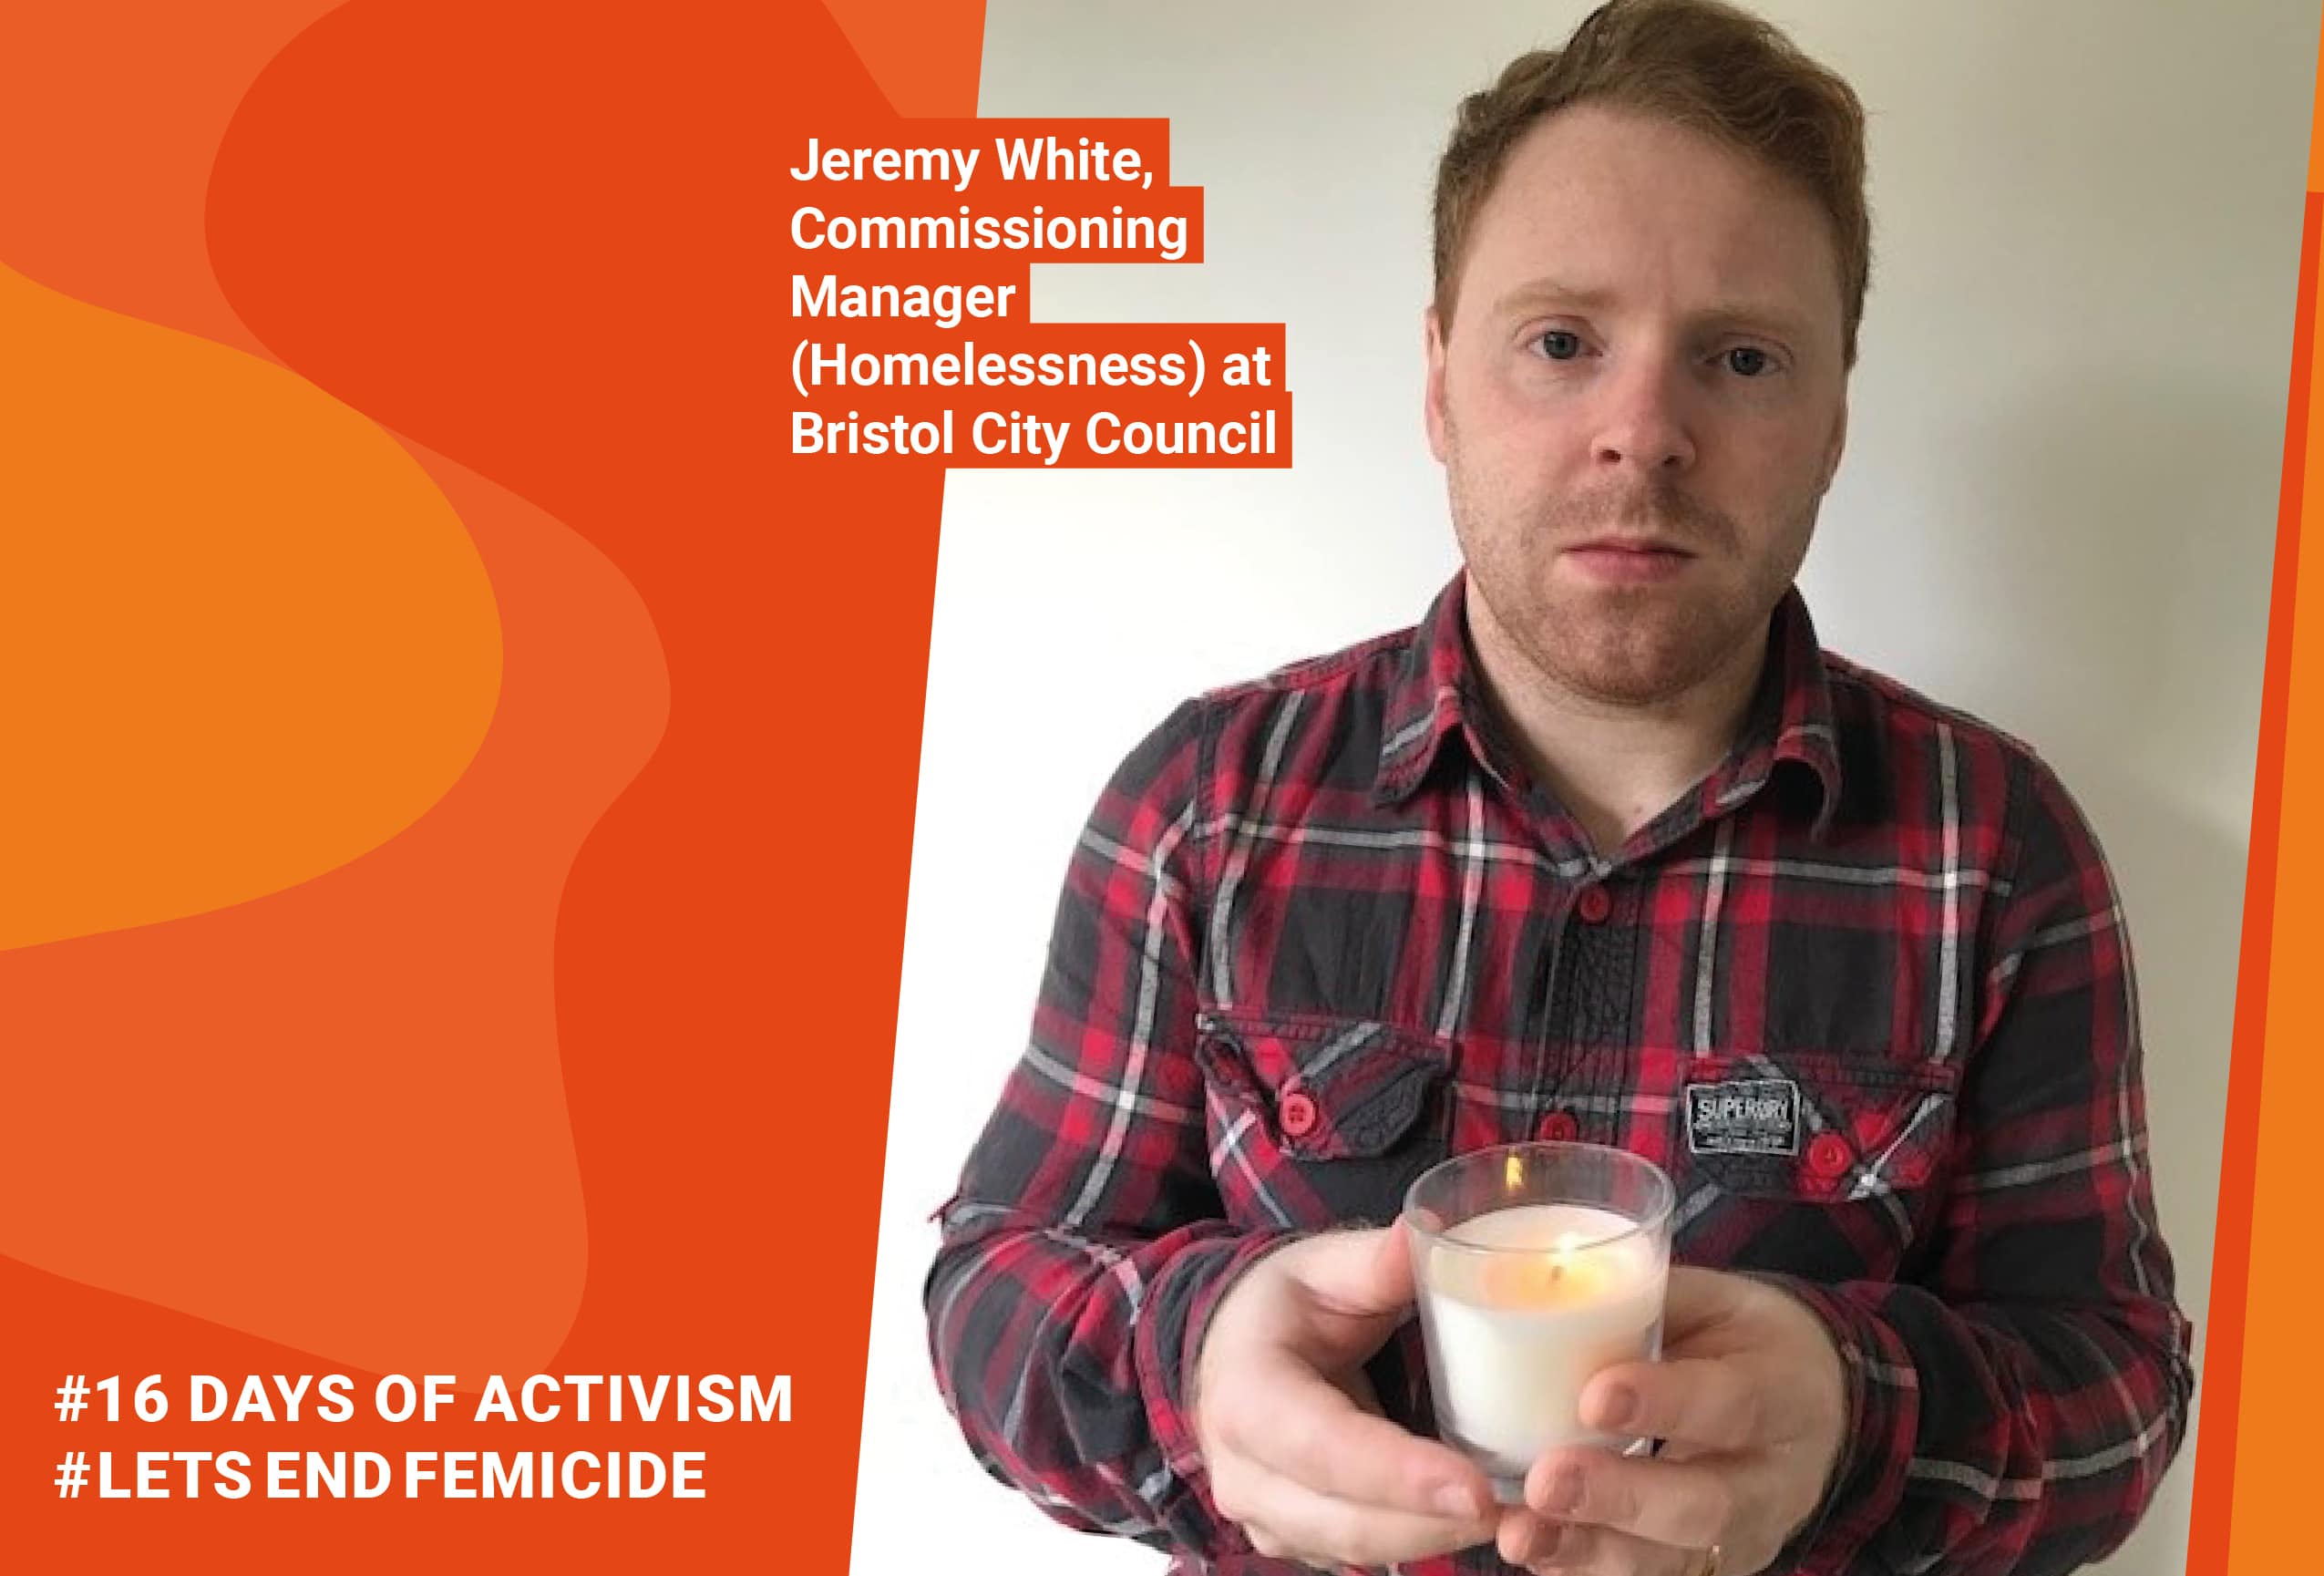 lighting a candle for #16 days of Activism